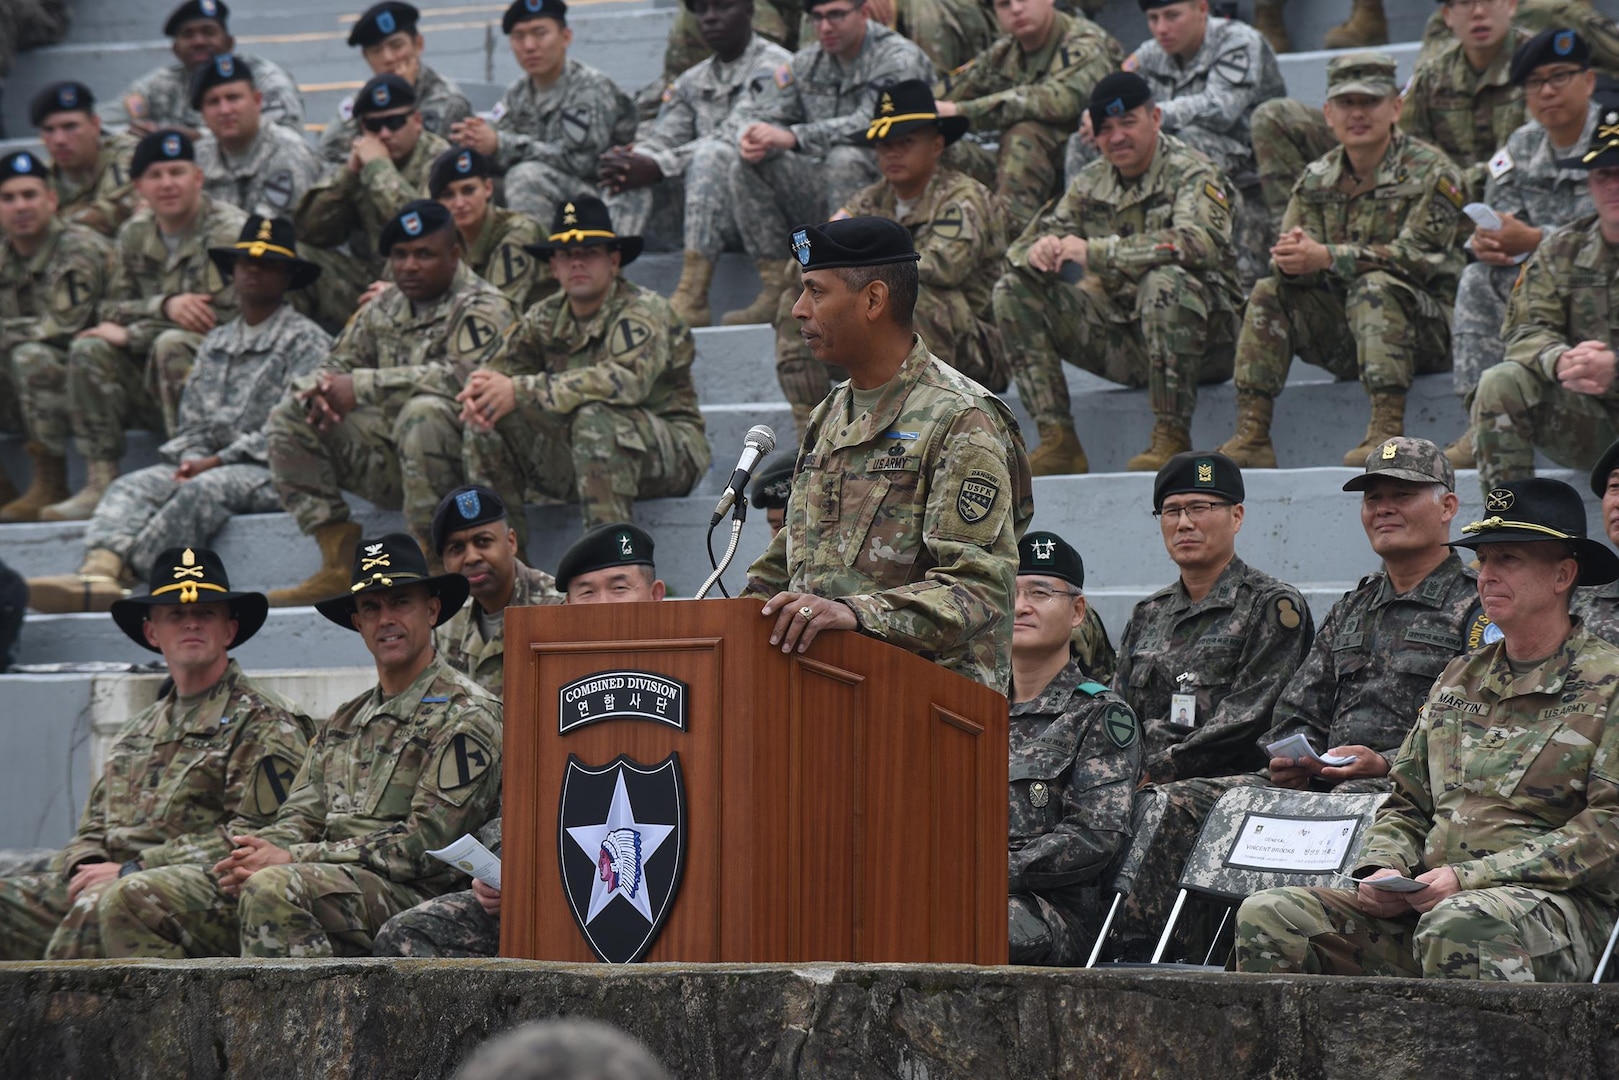 Gen. Vincent Brooks, commanding general, U.S. Forces Korea, congratulates the 131 U.S. and South Korean Soldiers that earned the Expert Infantryman Badge during a ceremony May 26 at Camp Casey, South Korea. “Well done by each and every one of you earning this coveted and very distinguished badge,” said Brooks, who earned the EIB as a captain. “To this day, the EIB remains one of my proudest accomplishments in my 40-year career.” (U.S. Army photo by Staff Sgt. Keith Anderson, 1st Armored Brigade Combat Team Public Affairs, 1st Cav. Div.)